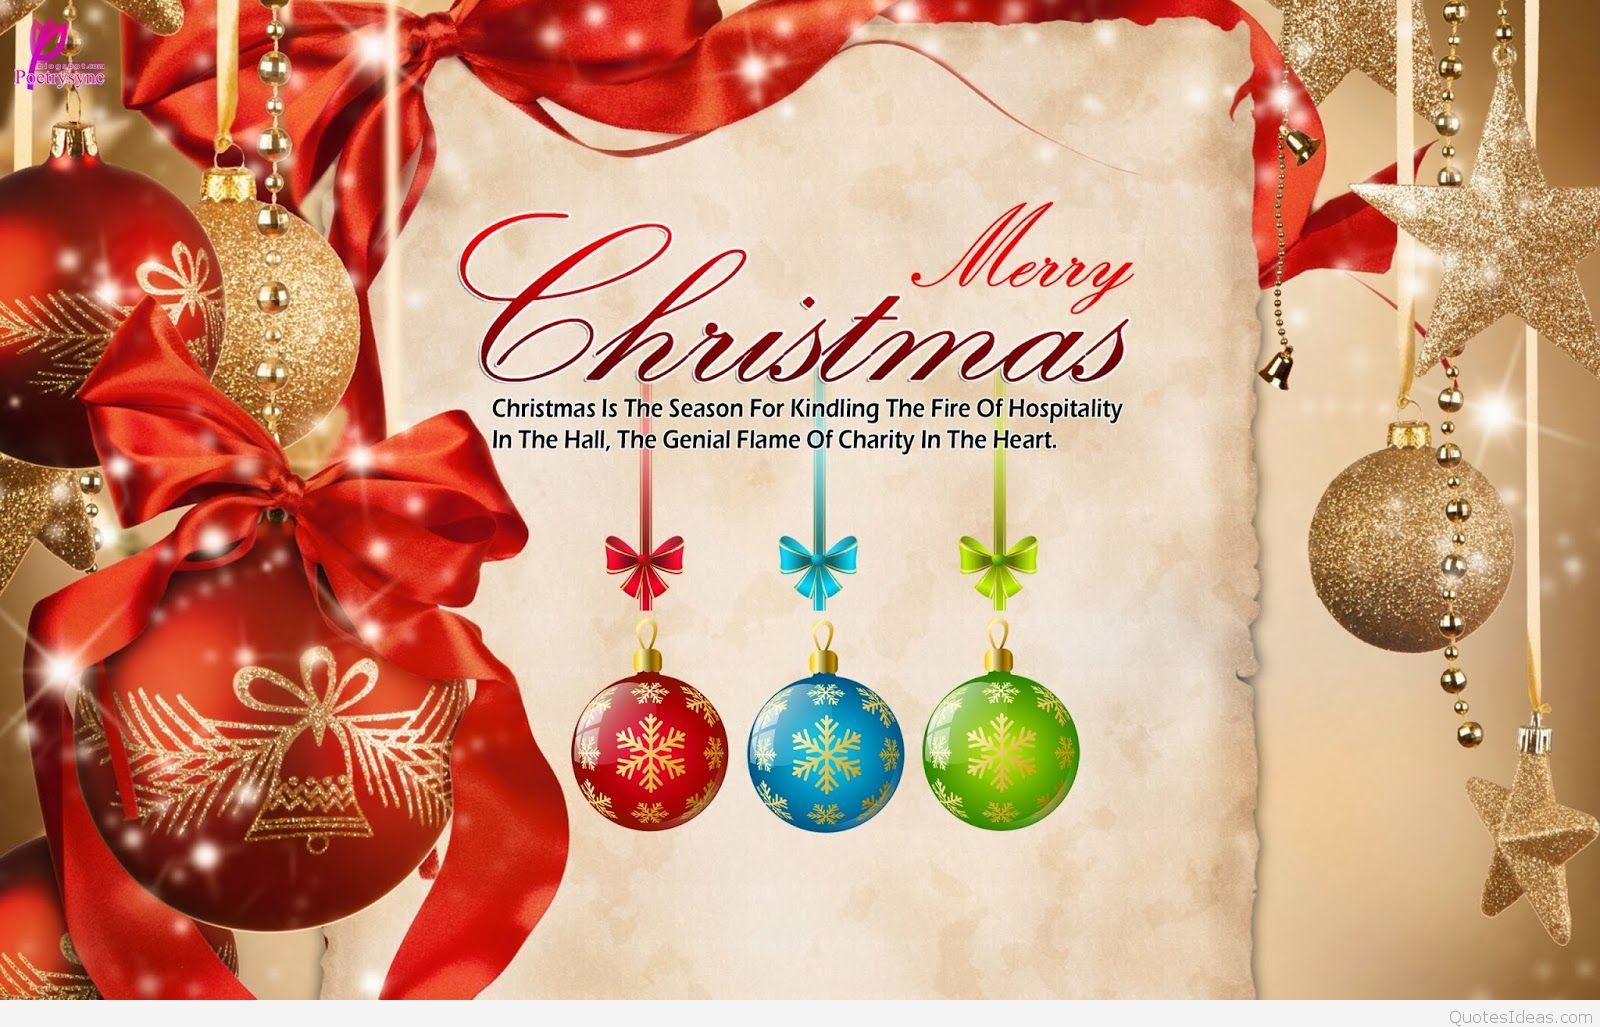 Merry Christmas greetings quotes & Christmas funny wishes